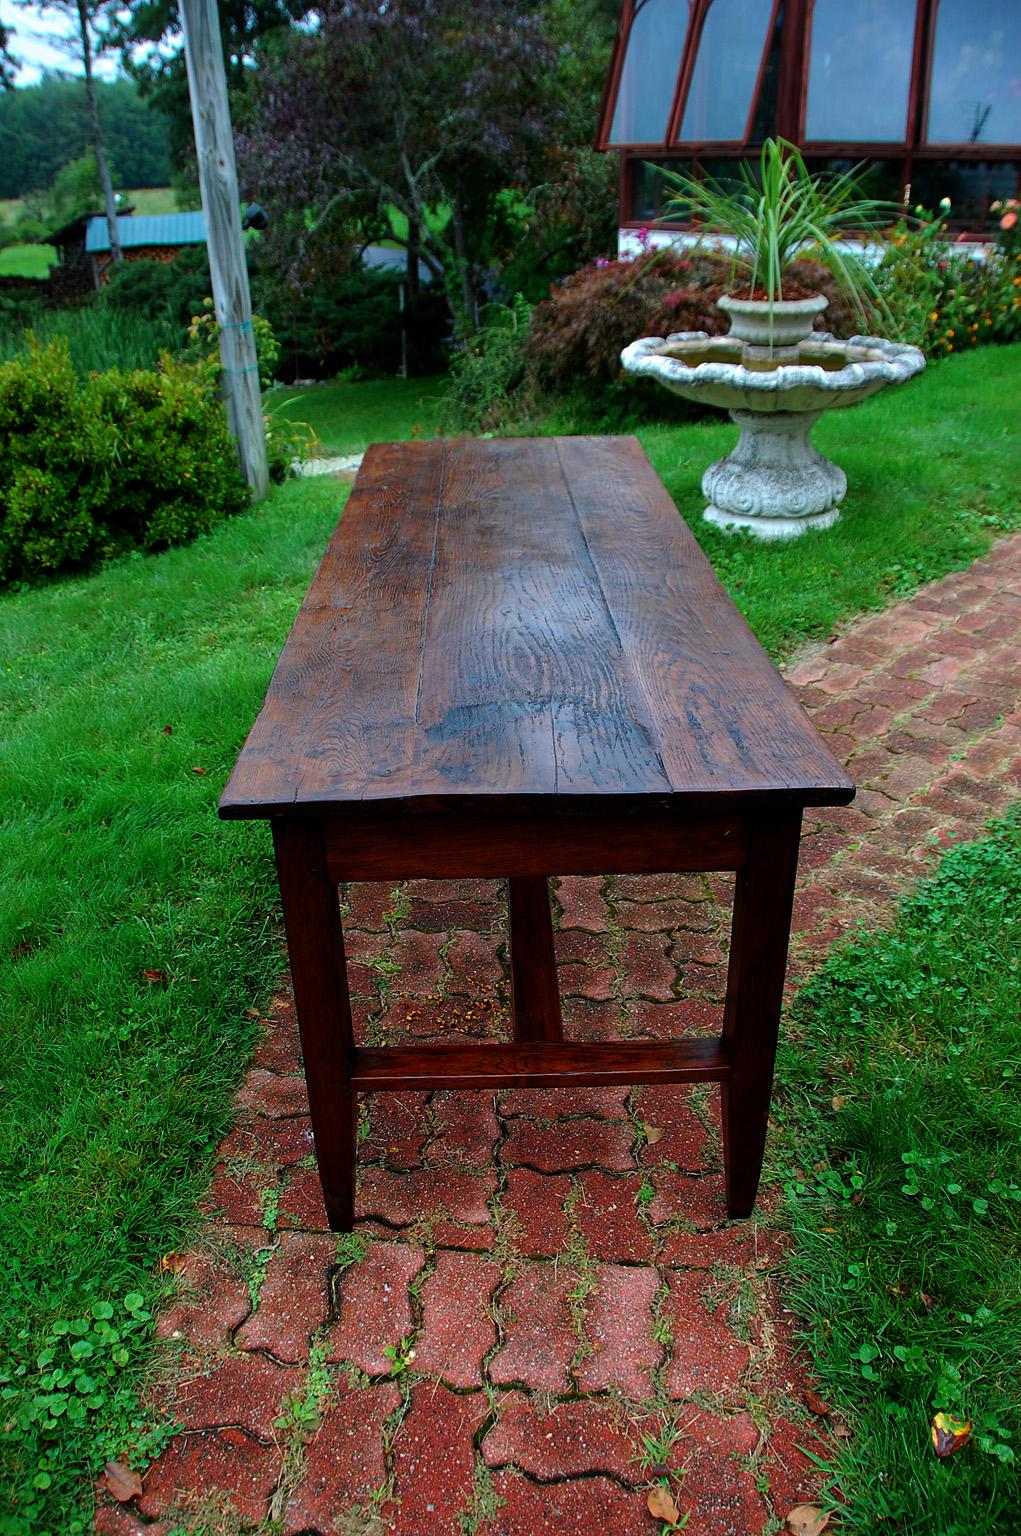 French mid 19th century provincial farmhouse table with H Stretcher, square tapered legs, and one drawer in the long side of the table. This 86 inch long country table came from the Burgundy region of France. It has a top of three substantial planks